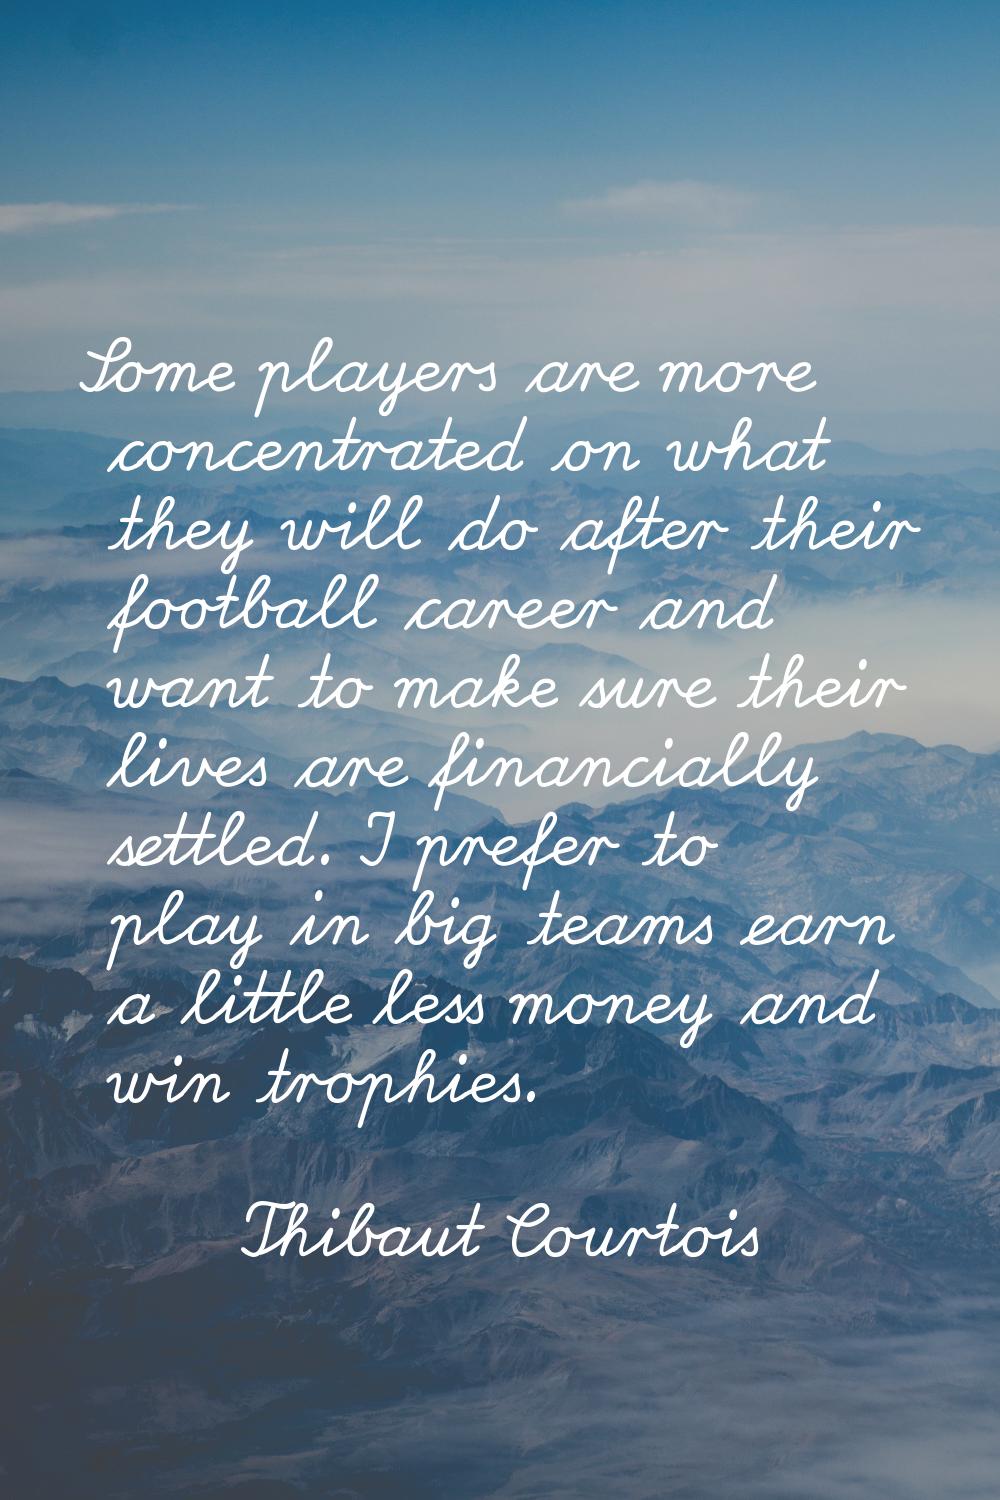 Some players are more concentrated on what they will do after their football career and want to mak